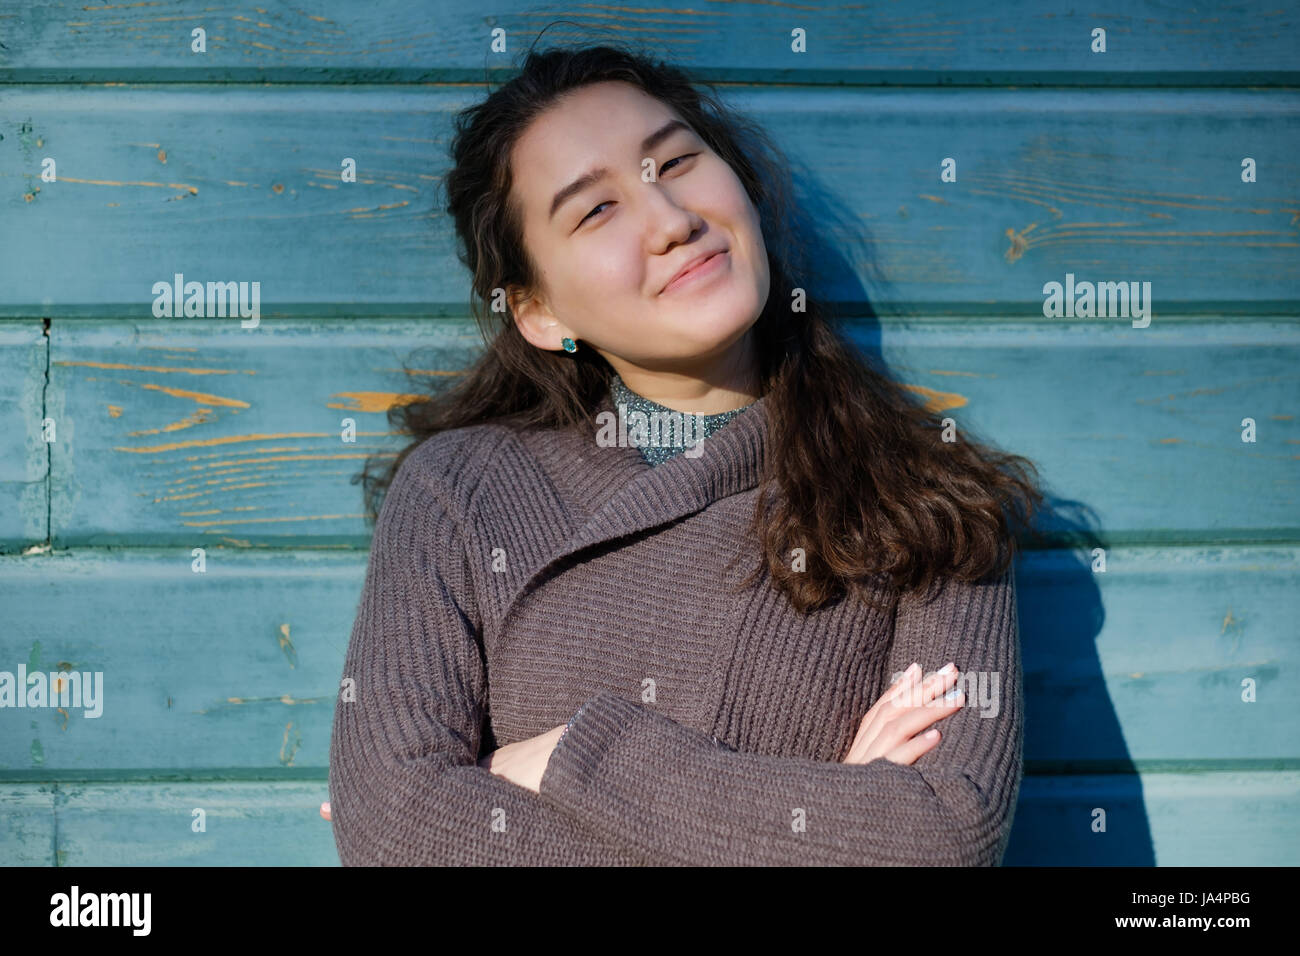 A beautiful Asian girl with long hair and a warm sweater is standing by the wooden blue wall. She looks forward with smile Stock Photo